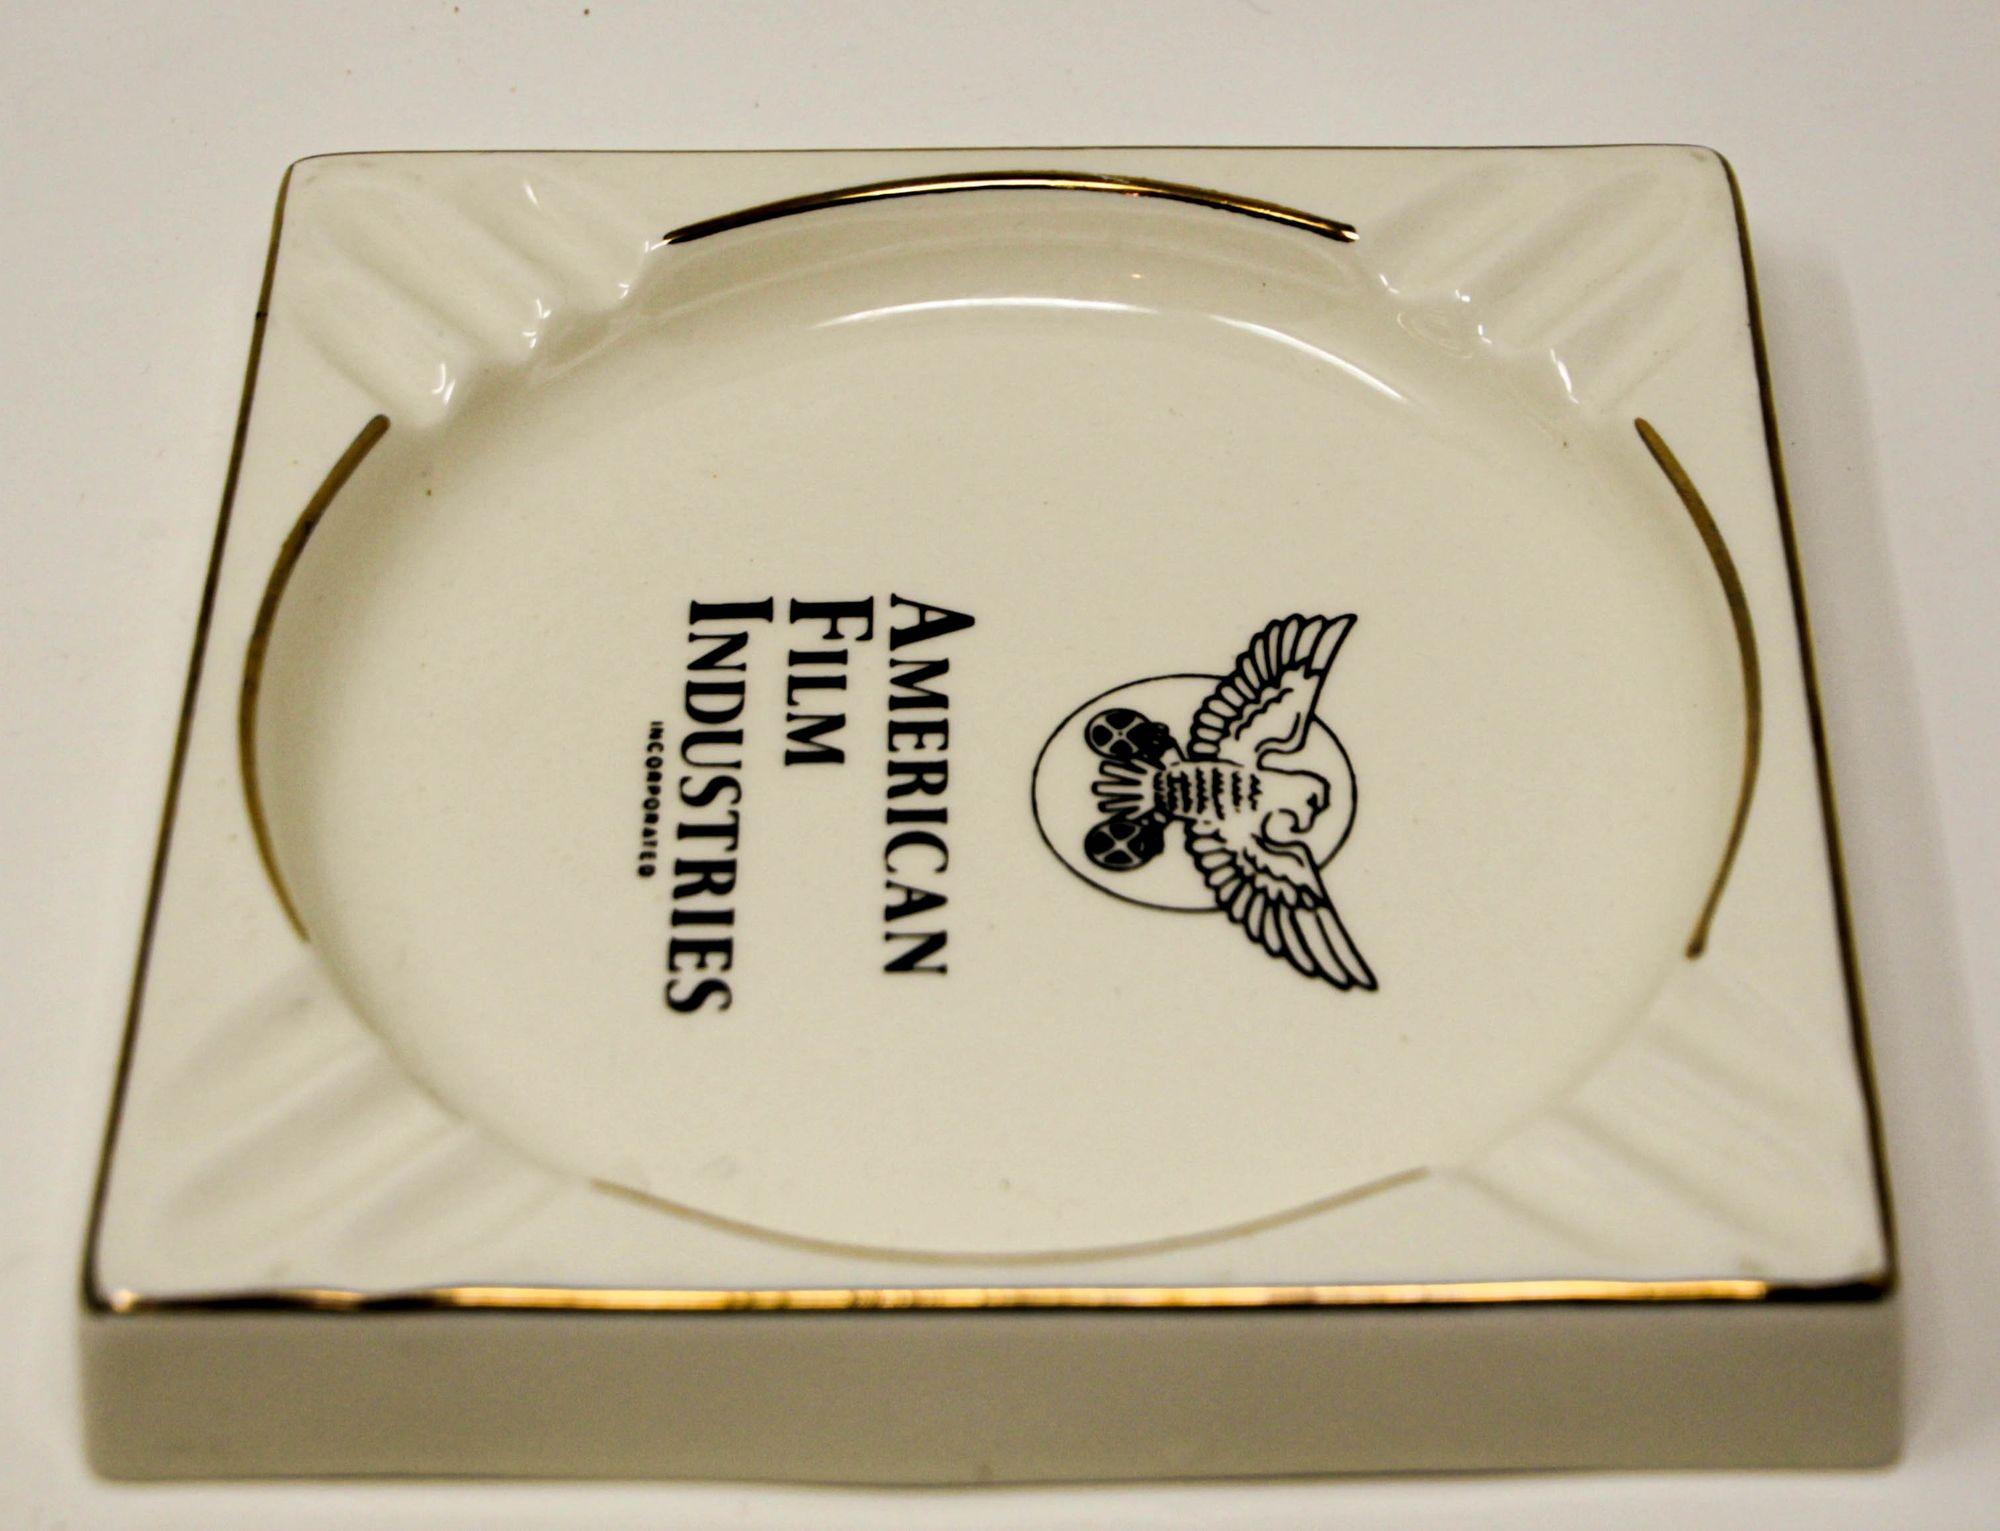 20th Century Vintage American Film Industries Incorporated Large Ceramic Ashtray For Sale